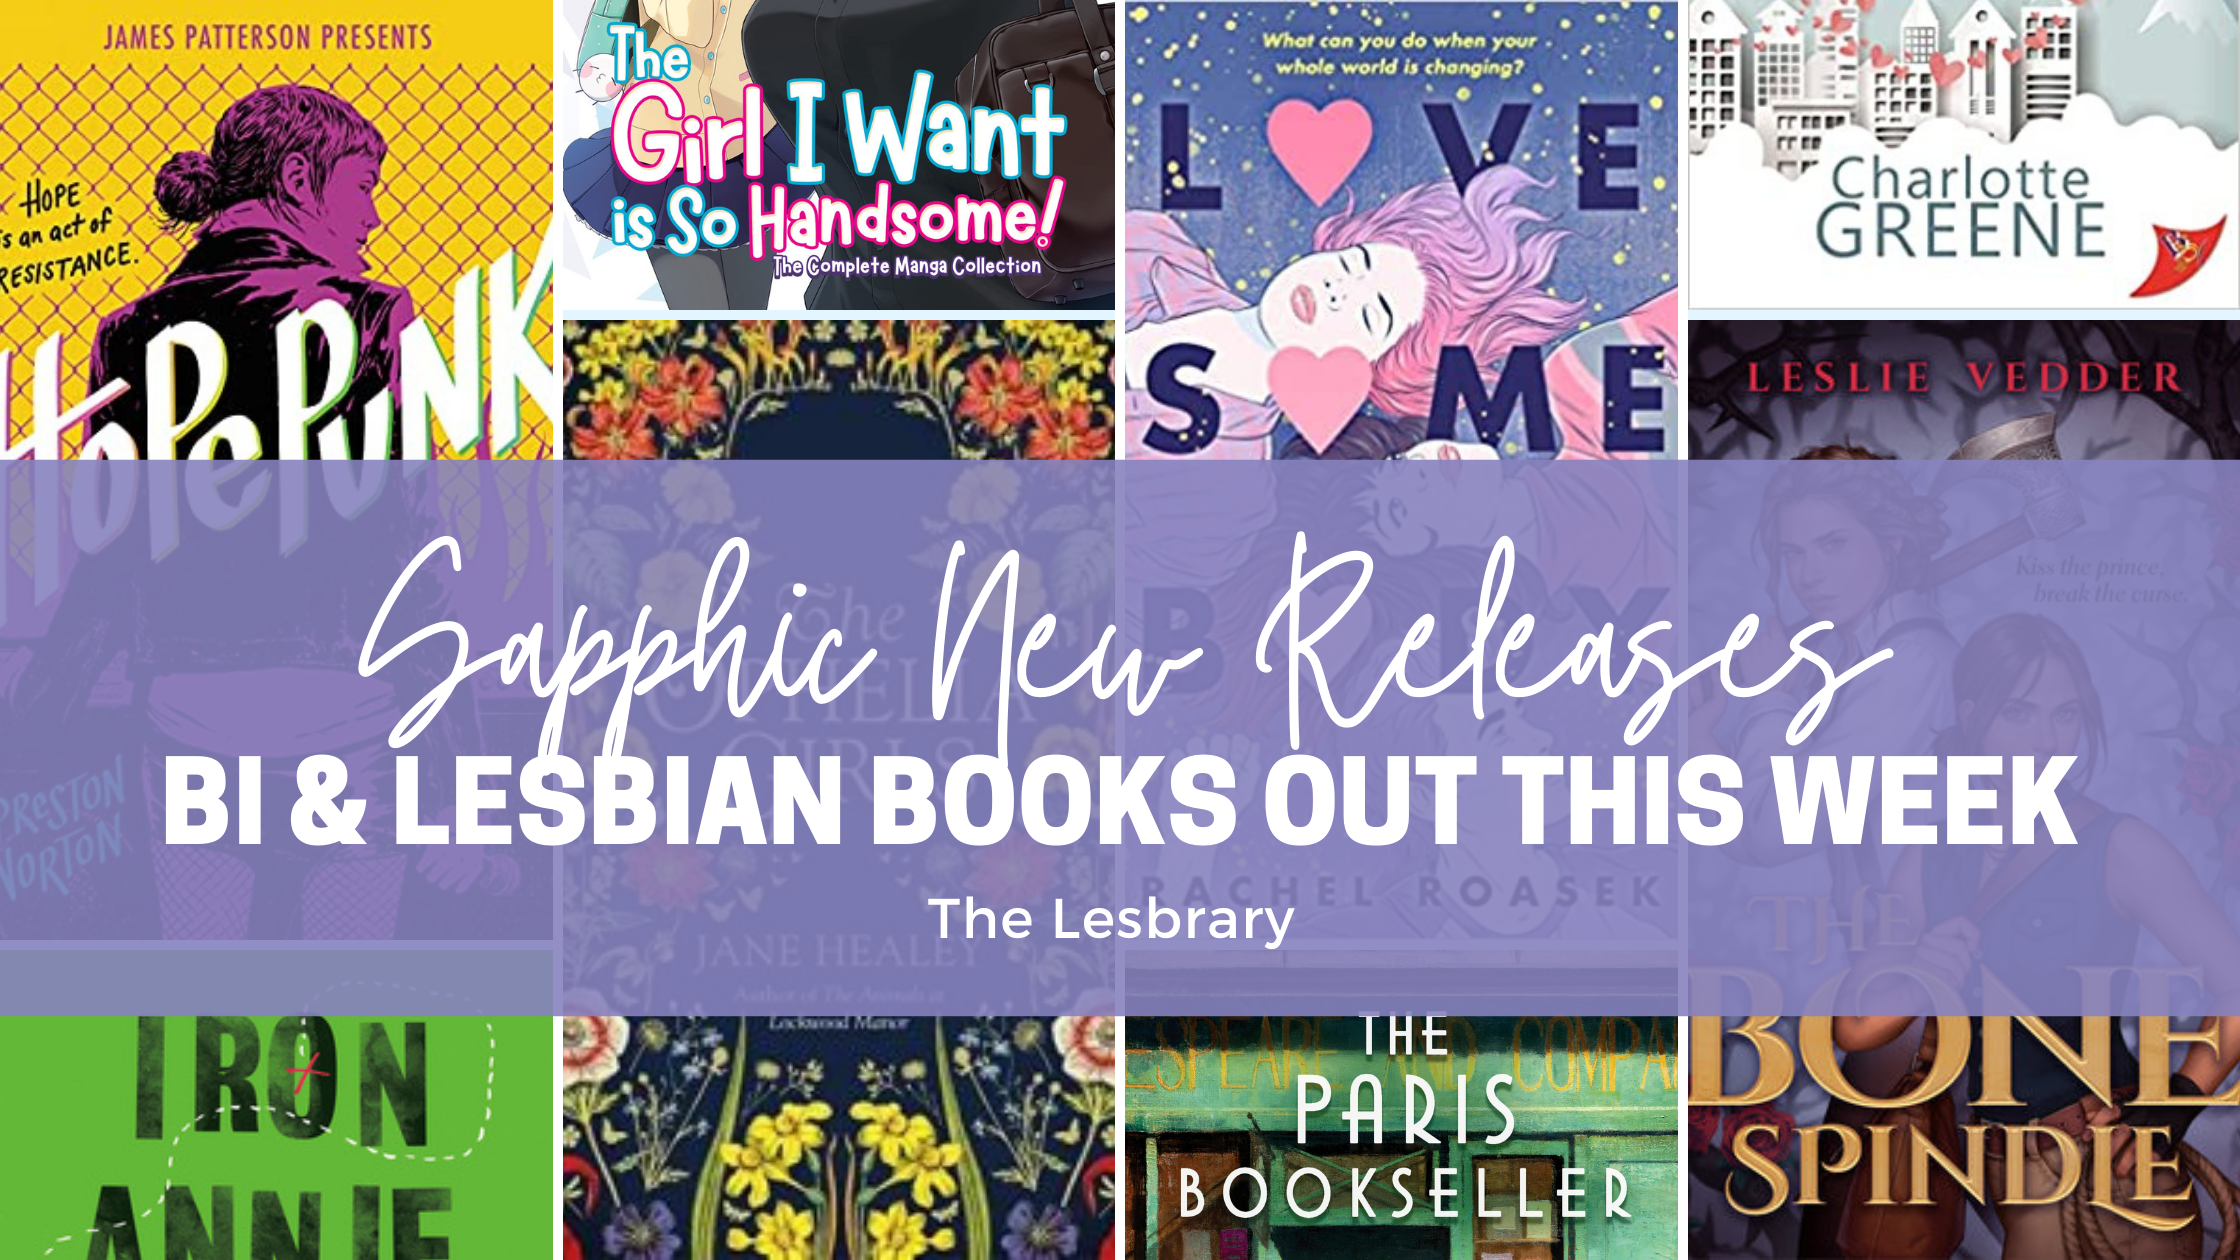 the covers of the books listed and the text Sapphic New Releases: Bi and Lesbian Books Out This Week